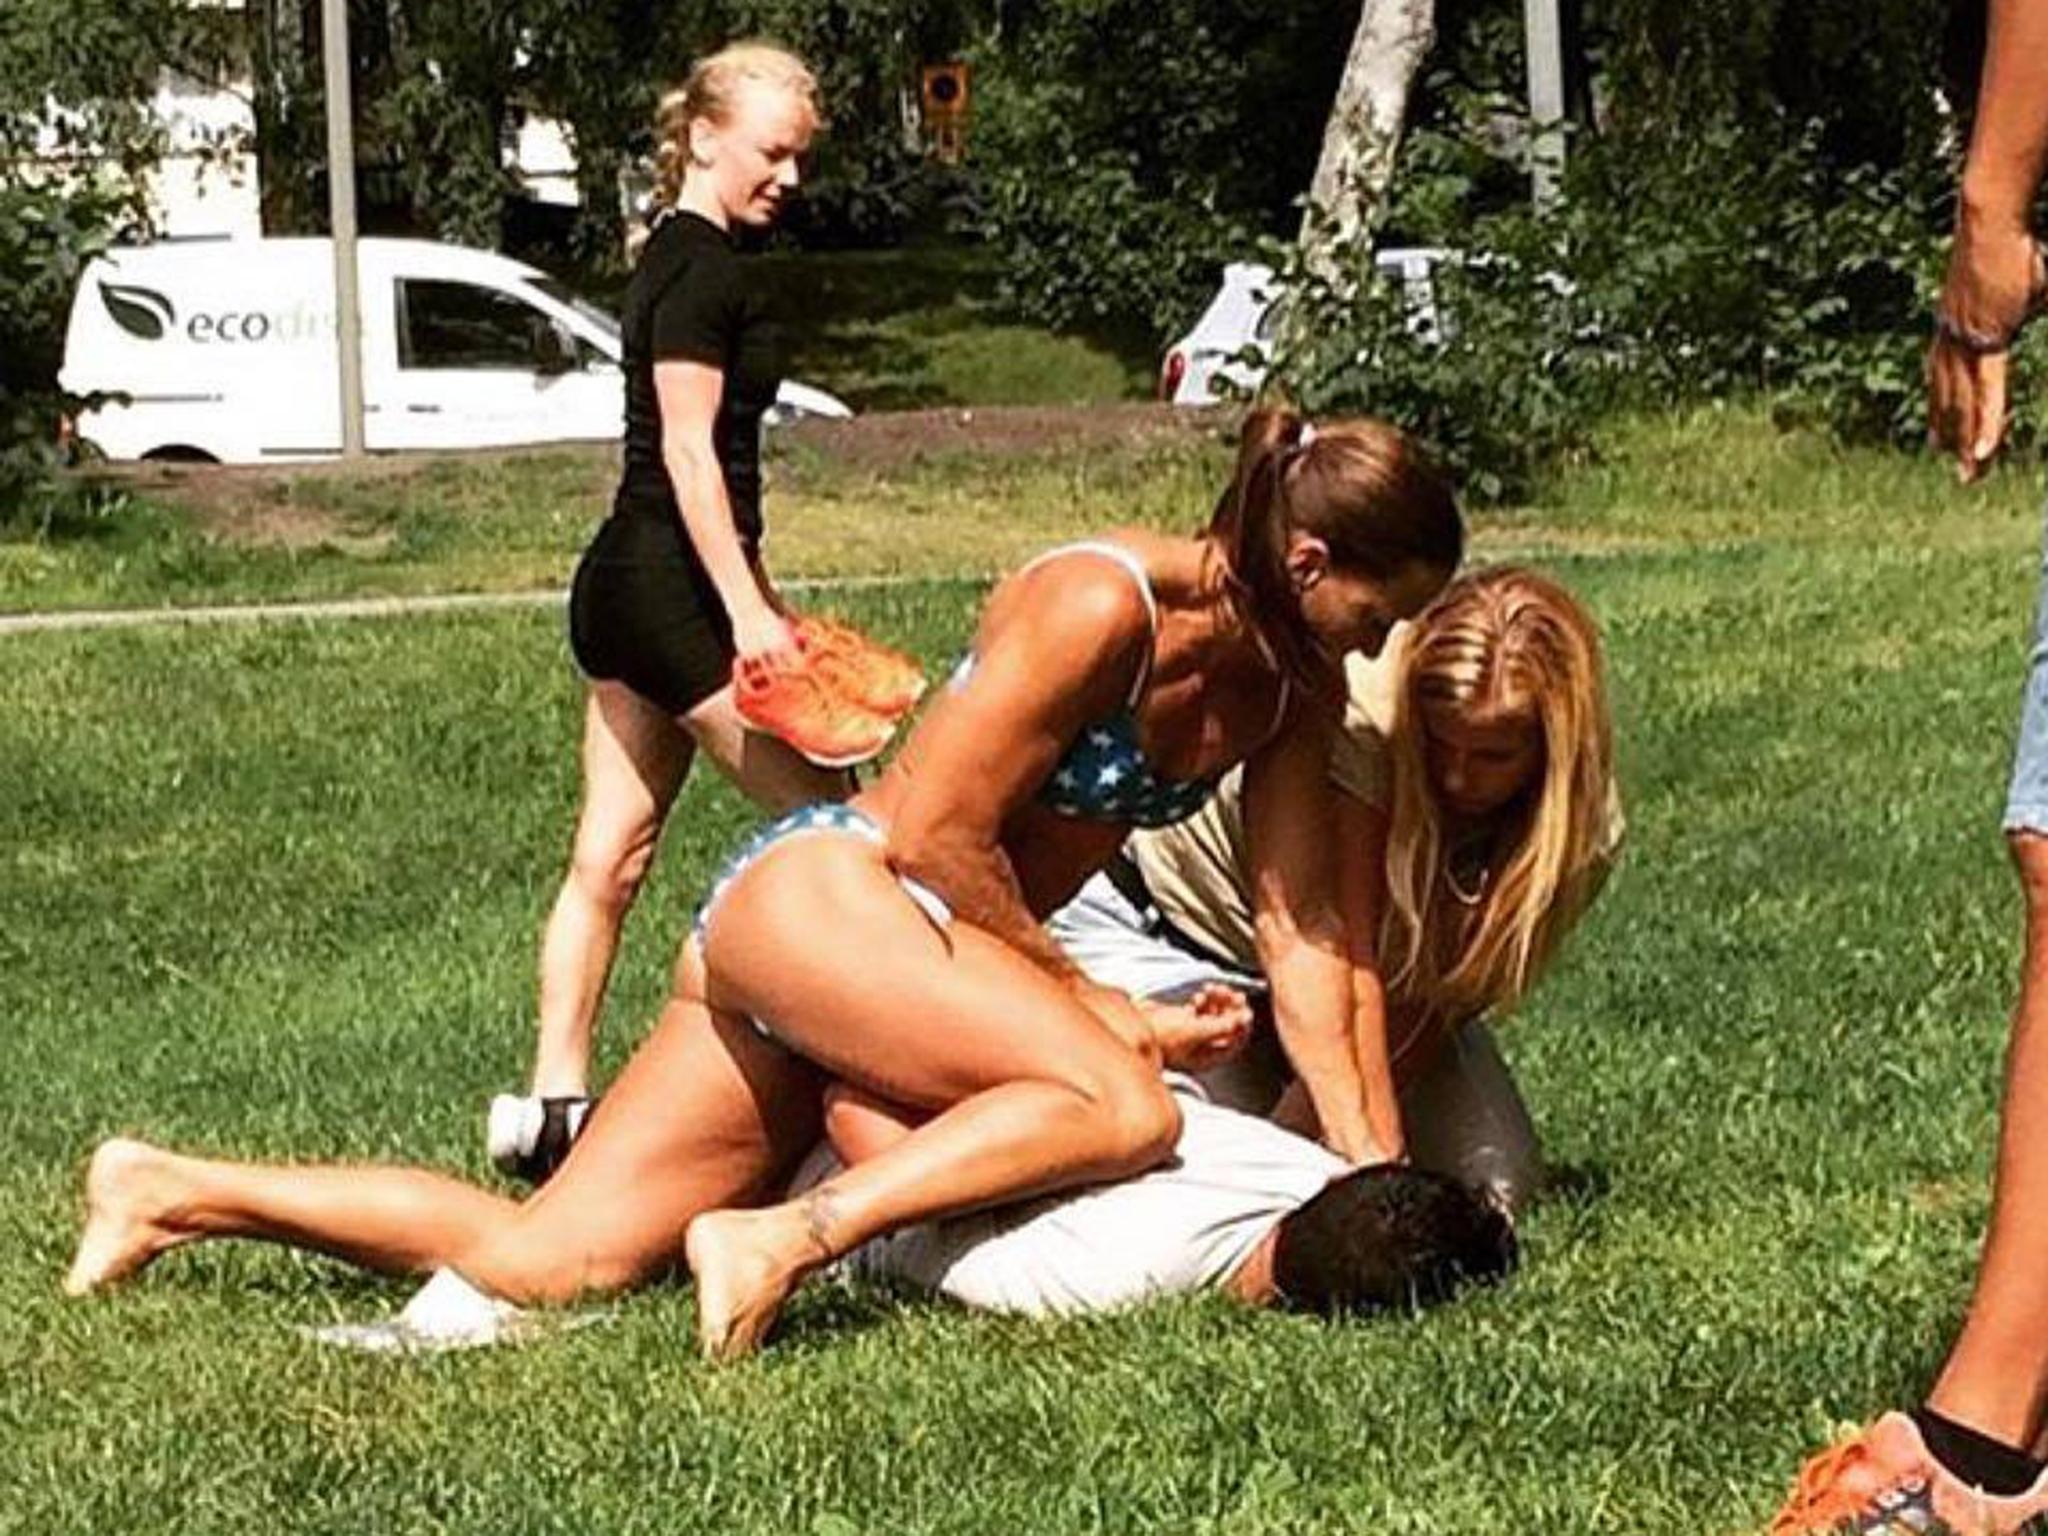 Swedish police officer Mikaela Kellner pins down a man suspected of stealing a friend's mobile phone